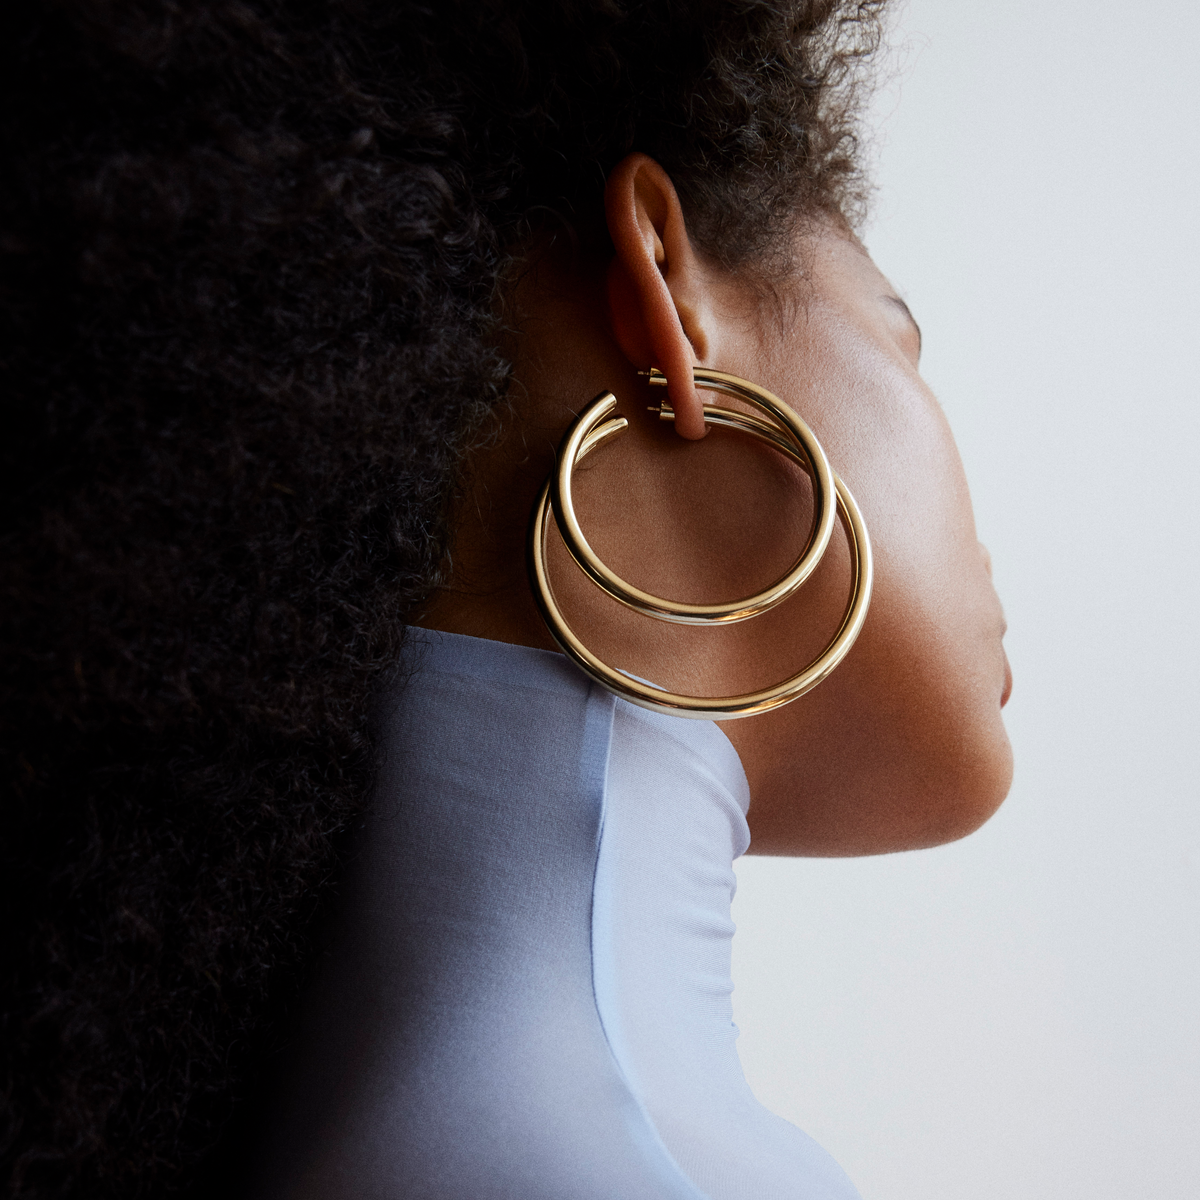 A close up shot of a model wearing two oversized hoop earrings facing away from the camera